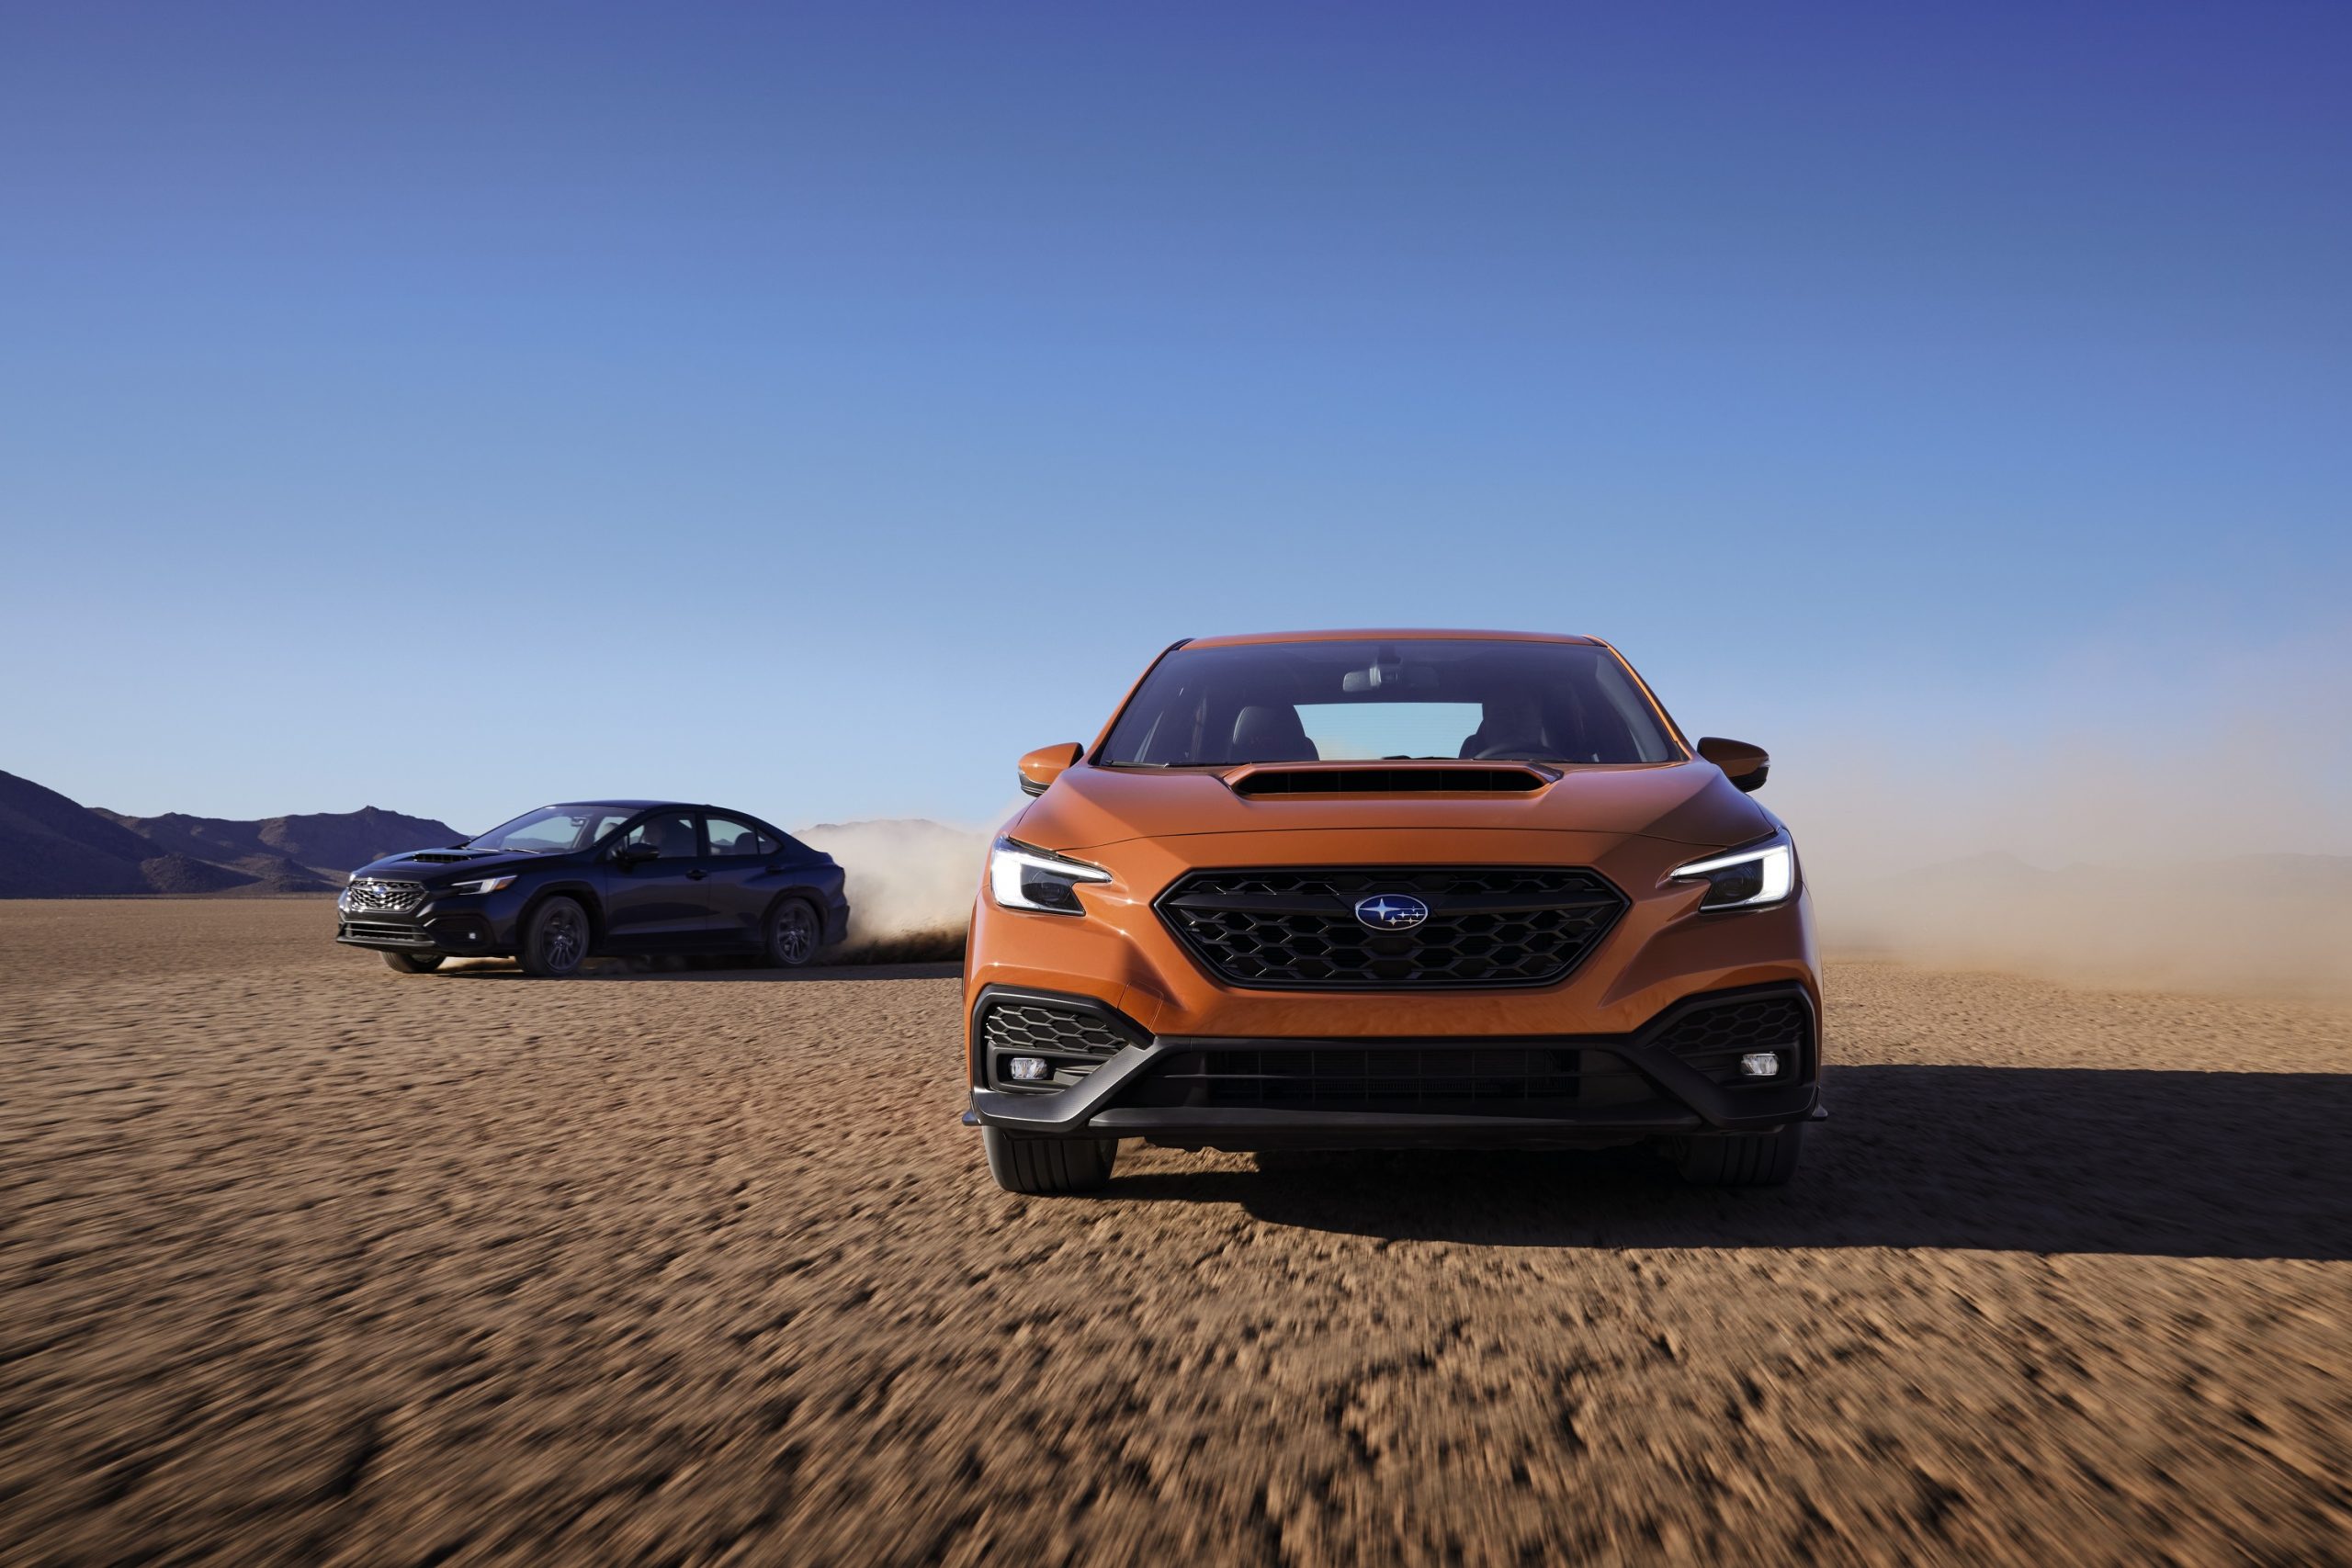 A front shot of a Subaru WRX driving across a dry lakebed, with another model close behind